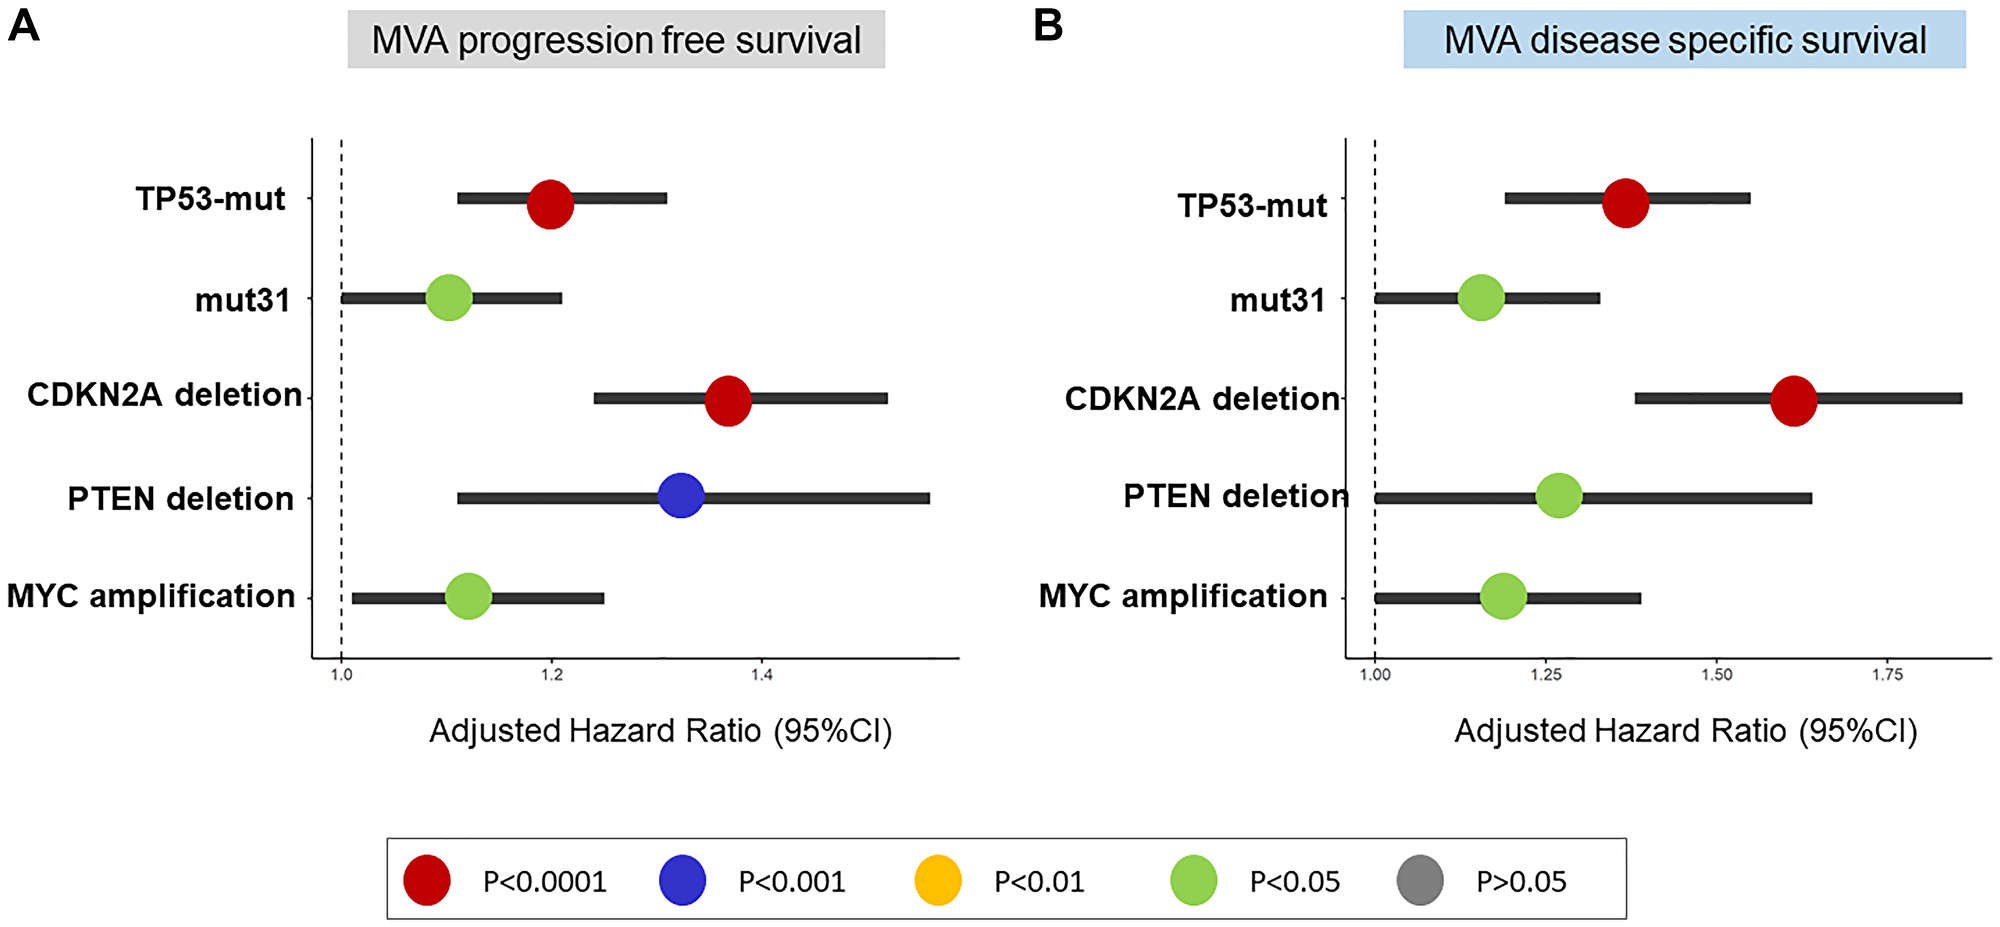 Multivariable analysis (MVA) of TP53-mutations, mut31, CDKN2A-deletion, PTEN-deletion, and MYC-amplification in Pan-Cancer TCGA.